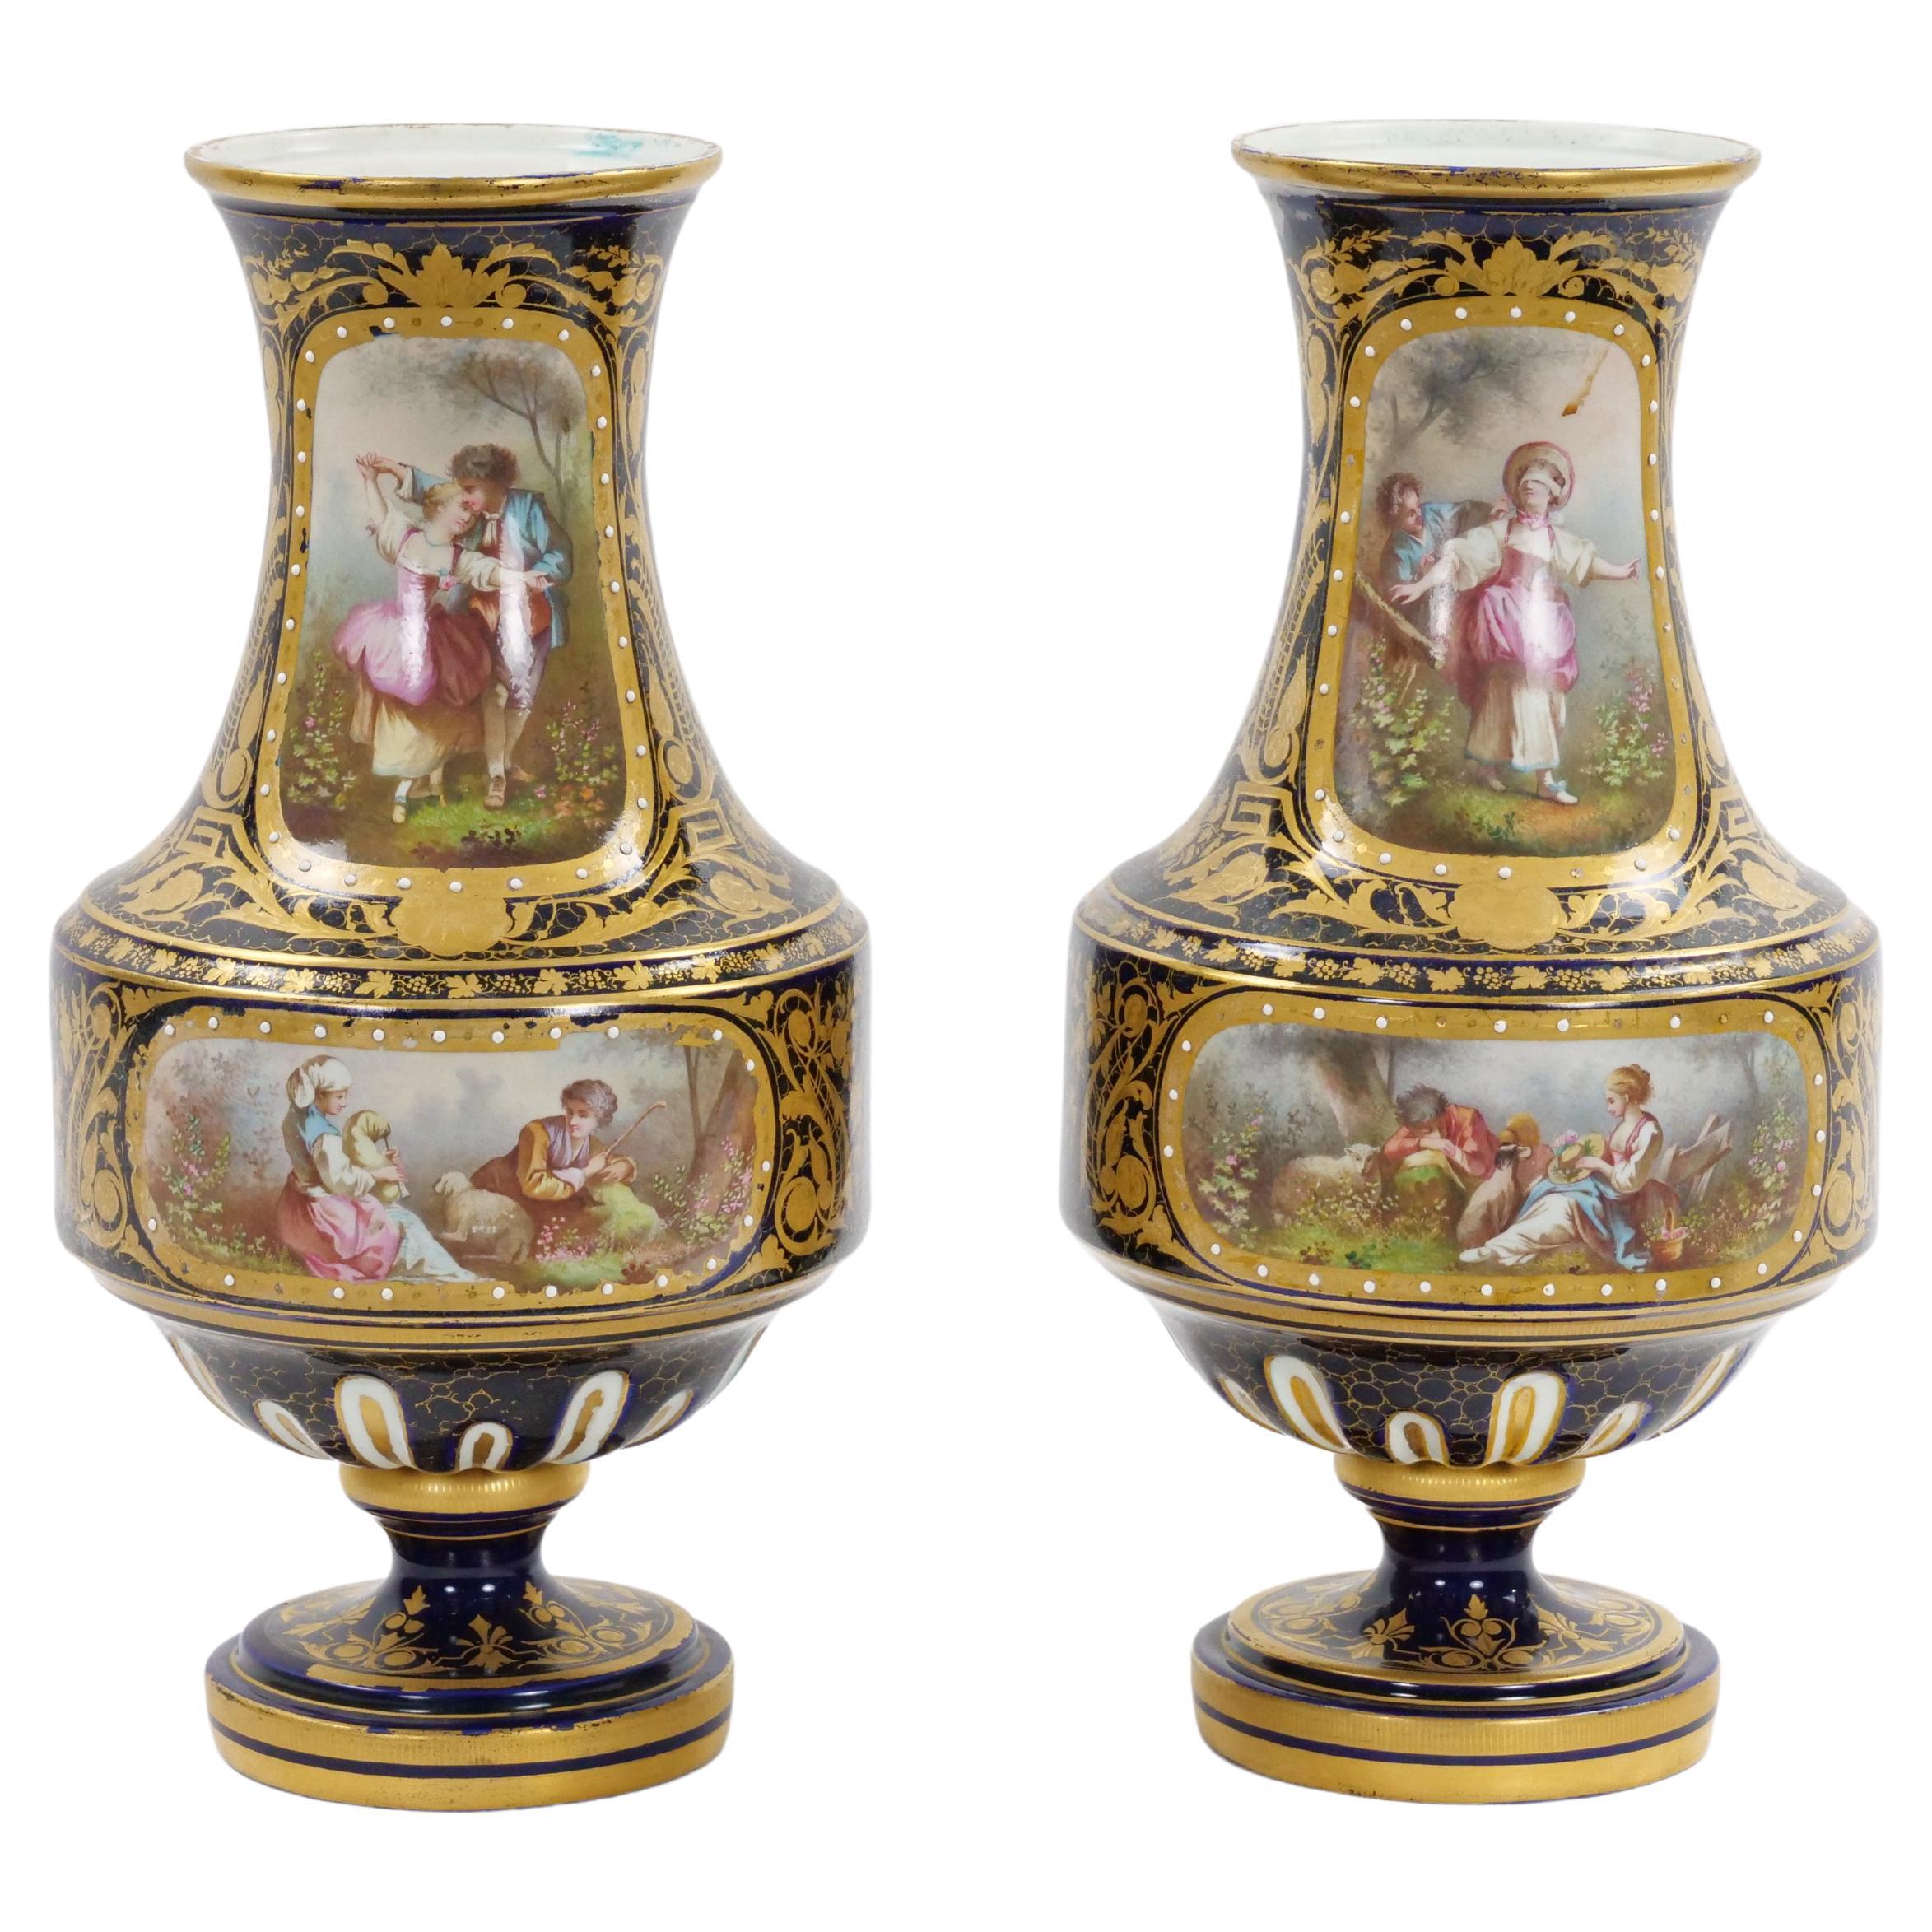 19th Century French Hand Painted Sevres Porcelain Pair Louis XV Style Vase